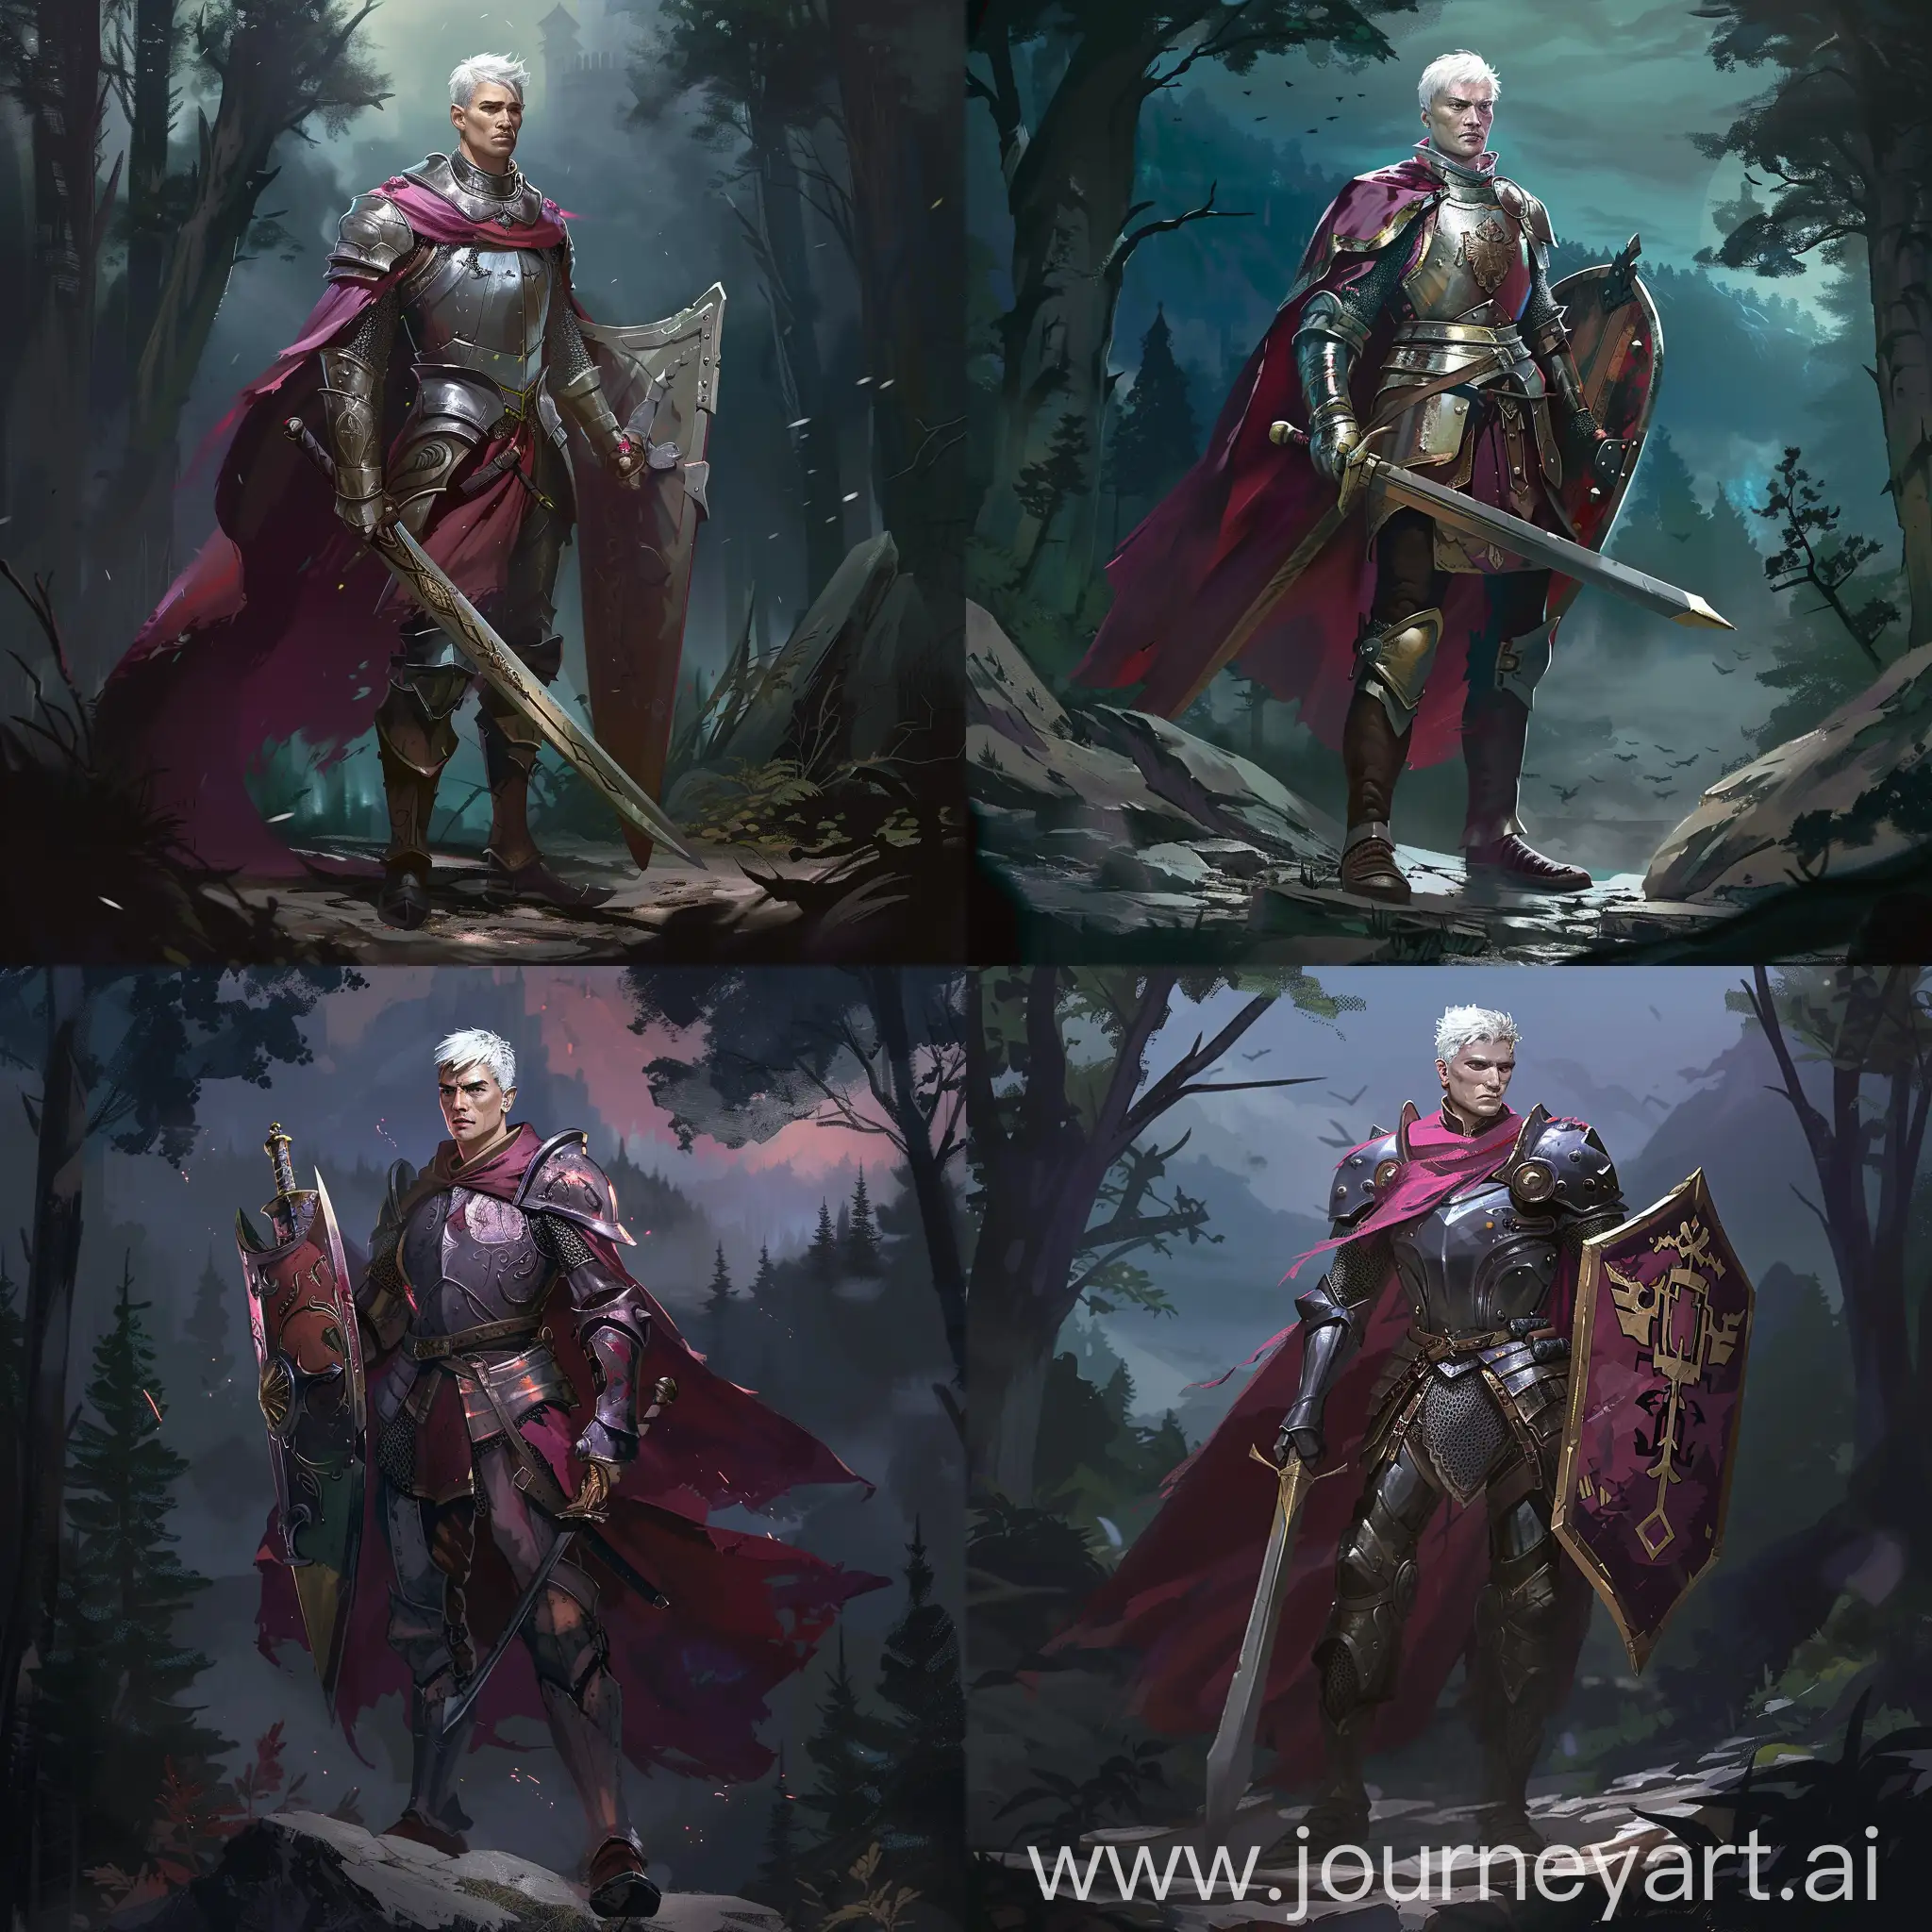 Draw a character from the Dungeons and Dragons universe according to the following description: he is male, human, with short white hair, paladin of a light deity, tall, wearing knight's armor with a crimson cloak, he has a tower shield and a sword, on a dark forest